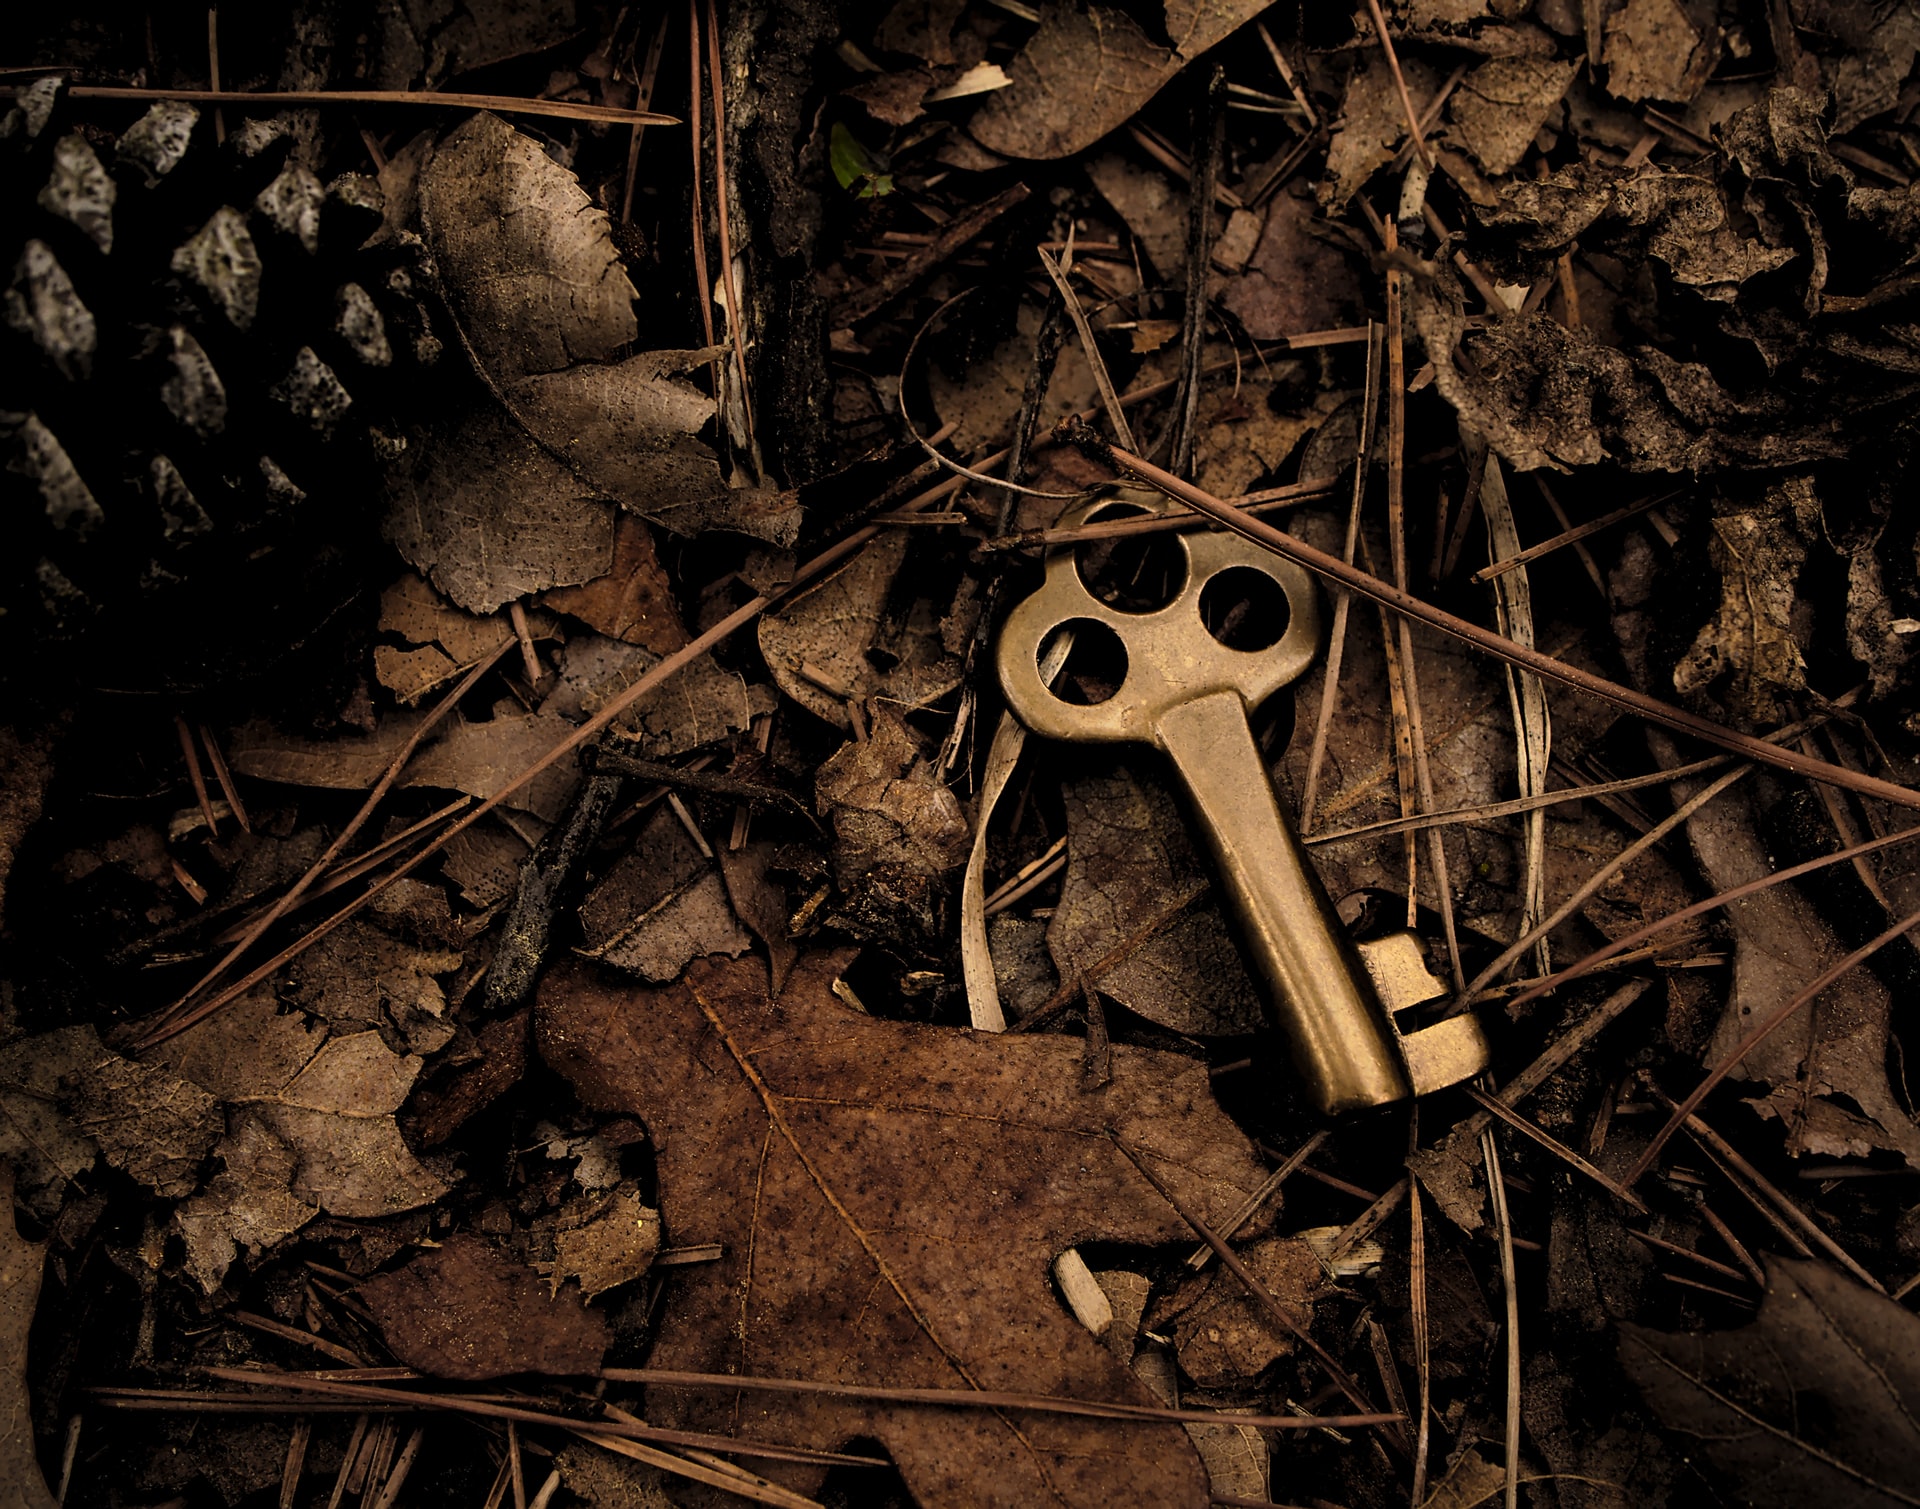 A brass key laying on dried leaves and twigs